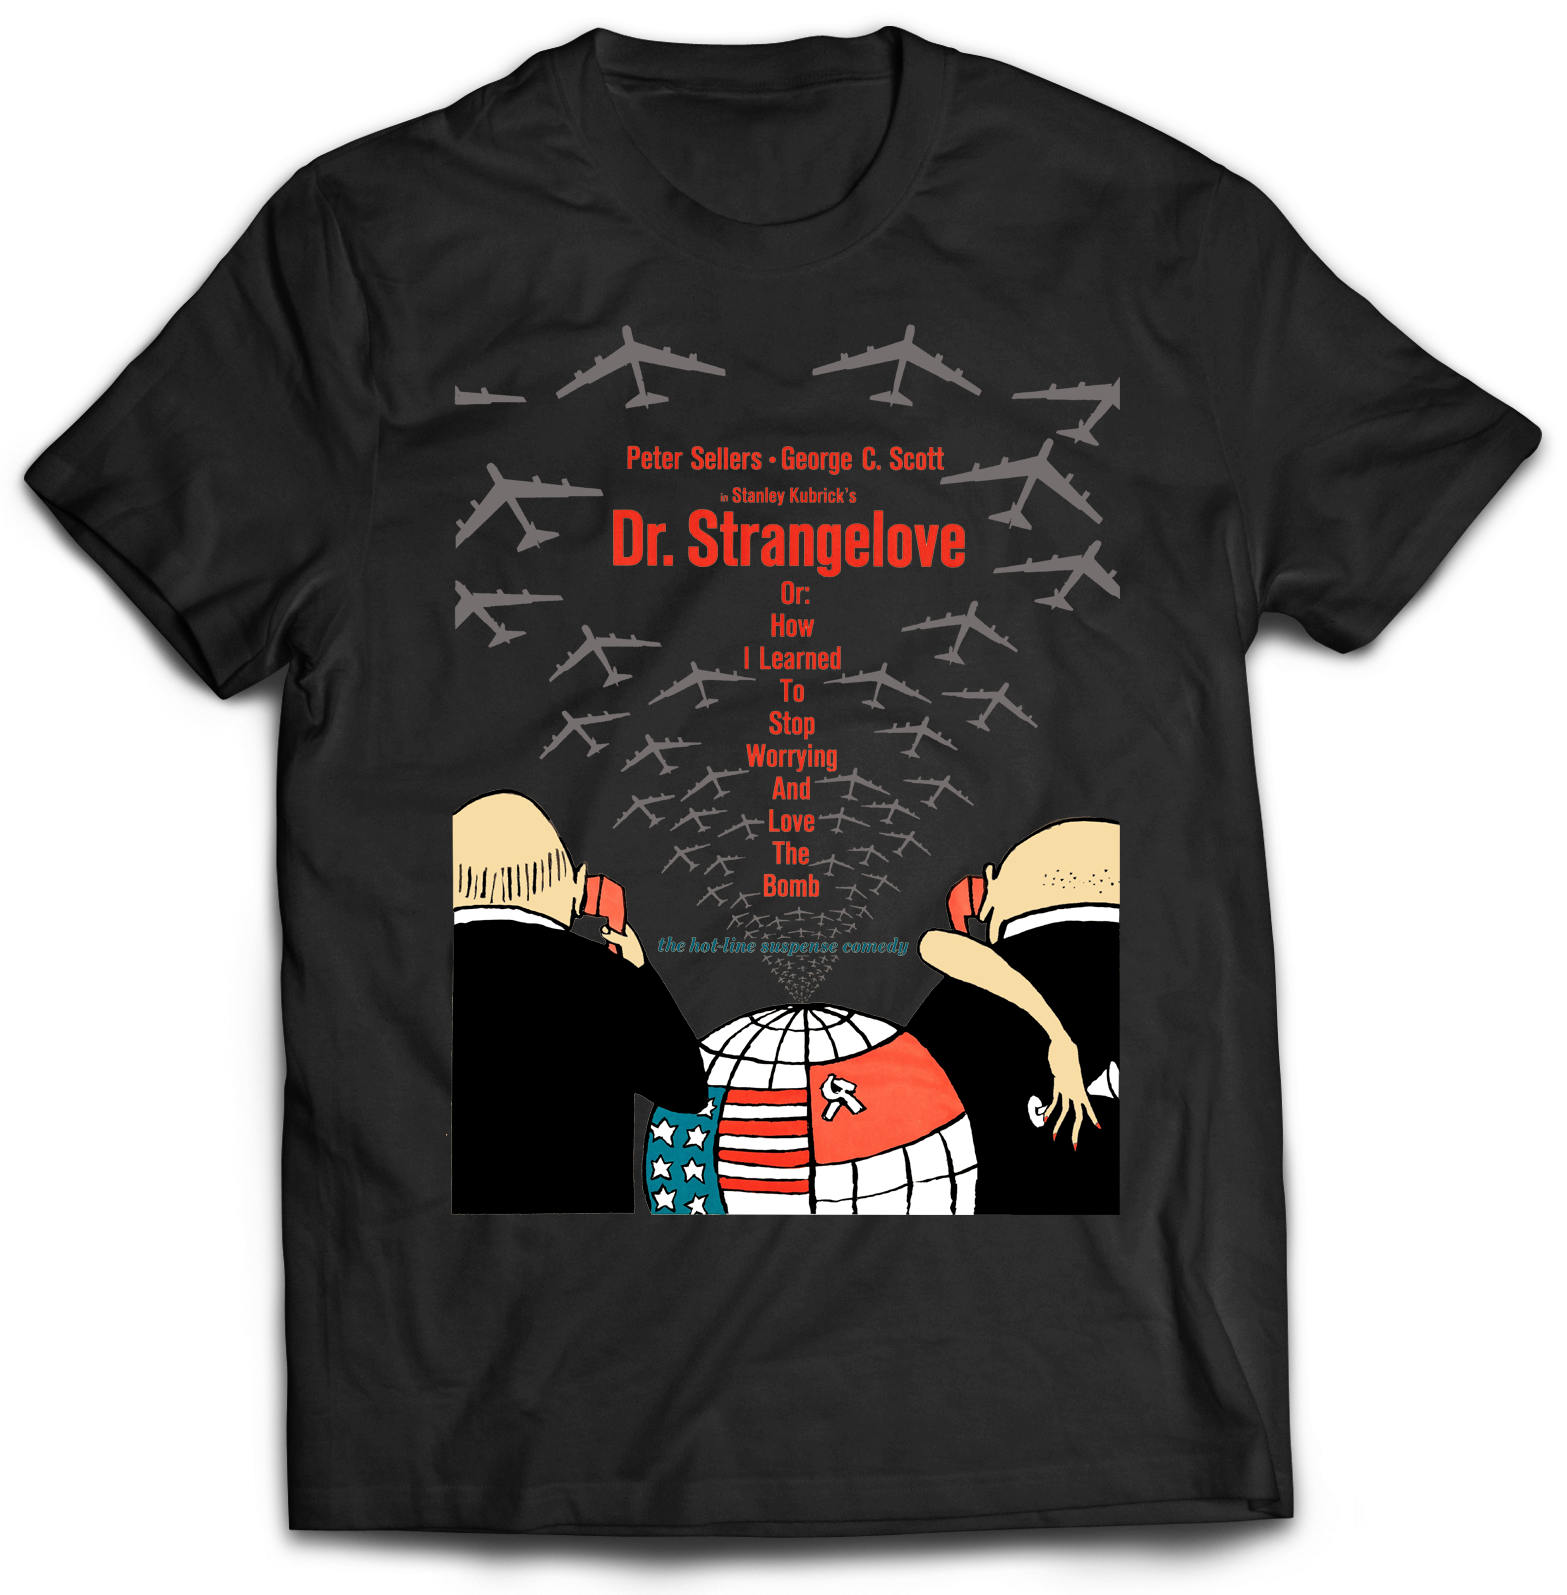 DR. STRANGELOVE, OR:  HOW I LEARNED TO STOP WORRYING AND LOVE THE BOMB - USA POSTER BLACK T-SHIRT